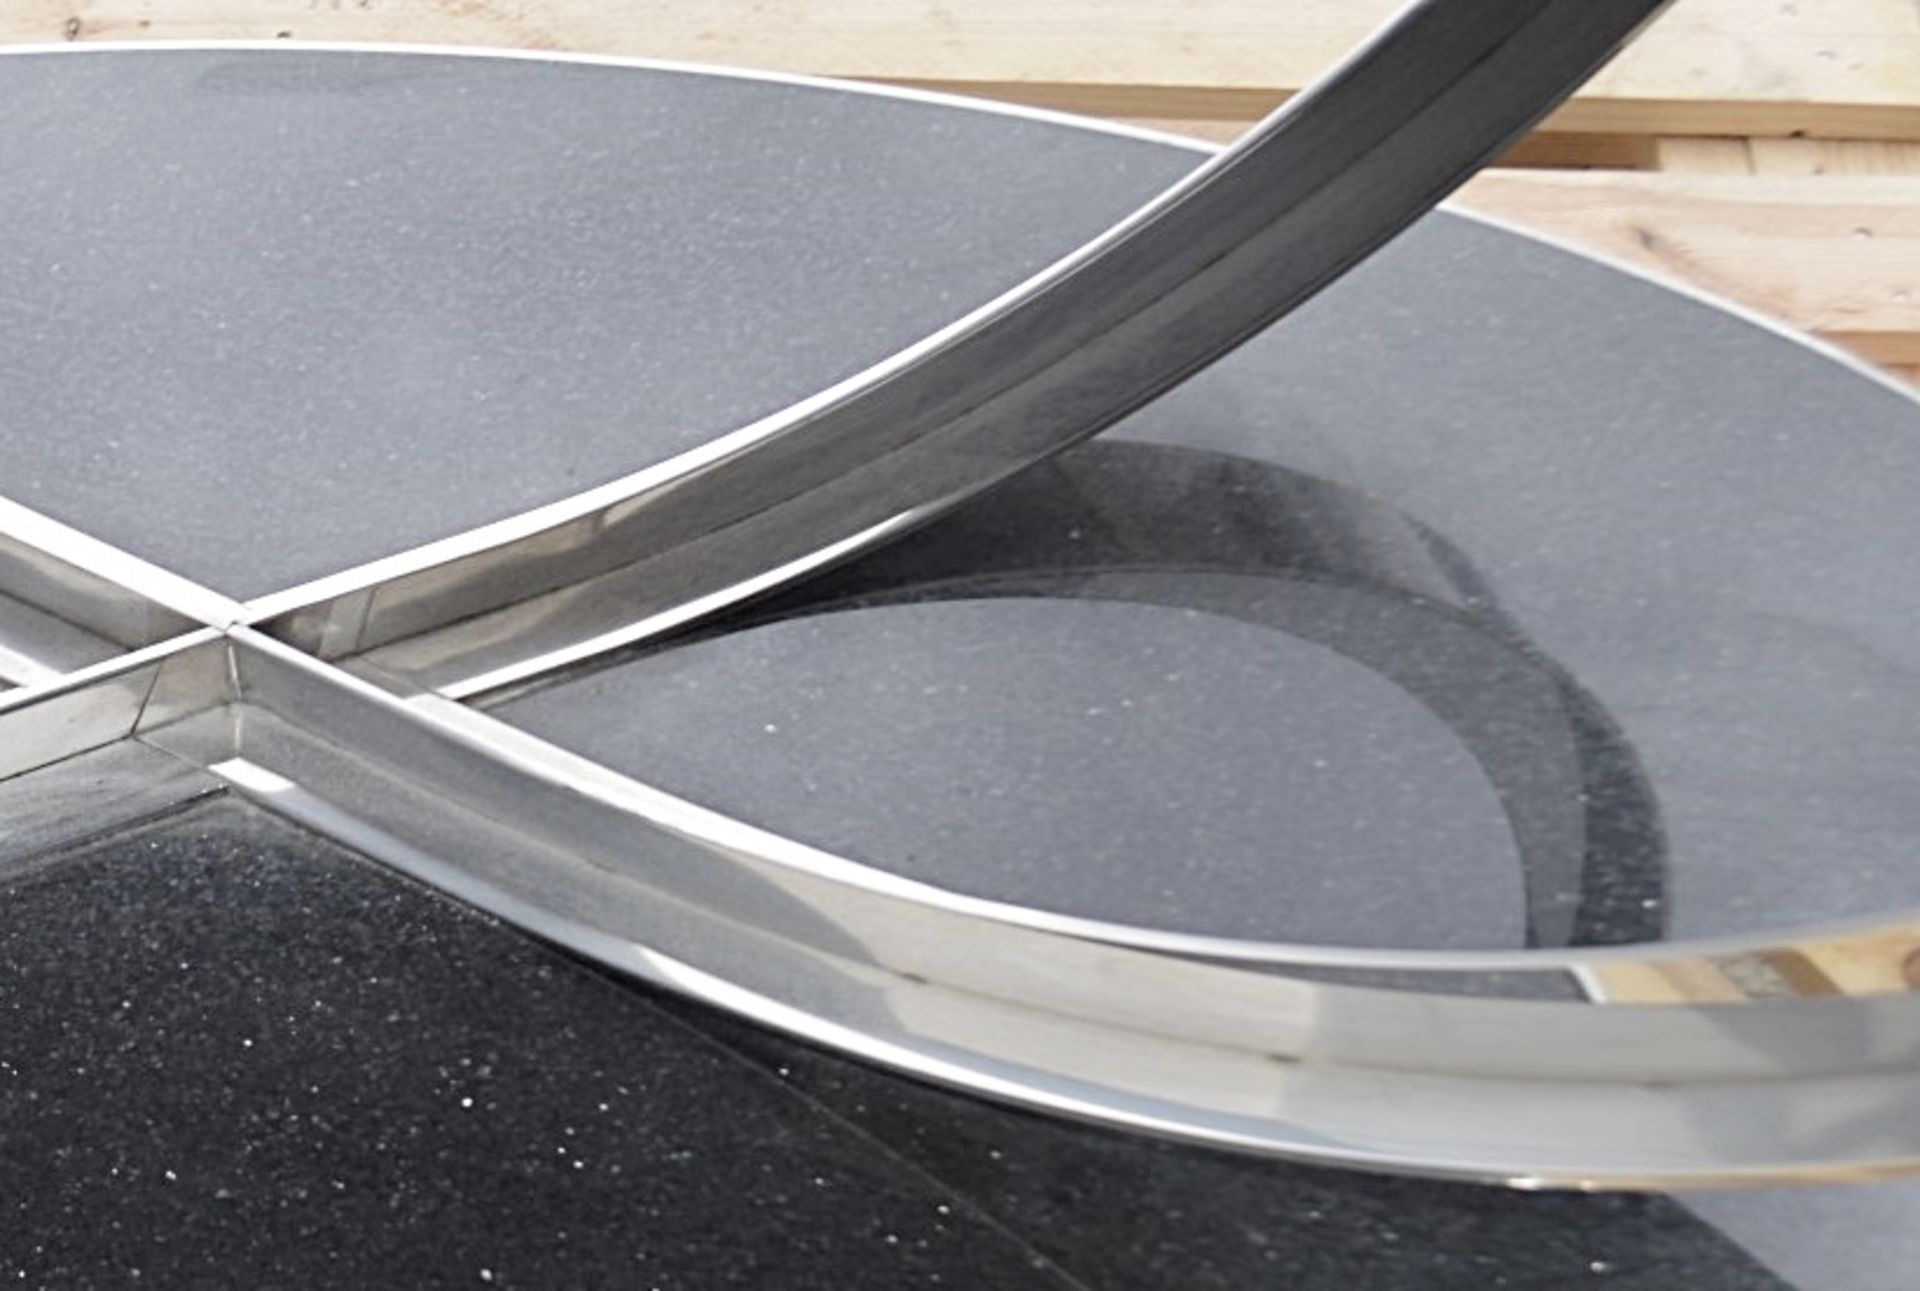 1 x Stunning 1.5 Metre Metal Oval Table With A Granite Style Surface And Sculptural Cross Base - Image 2 of 3